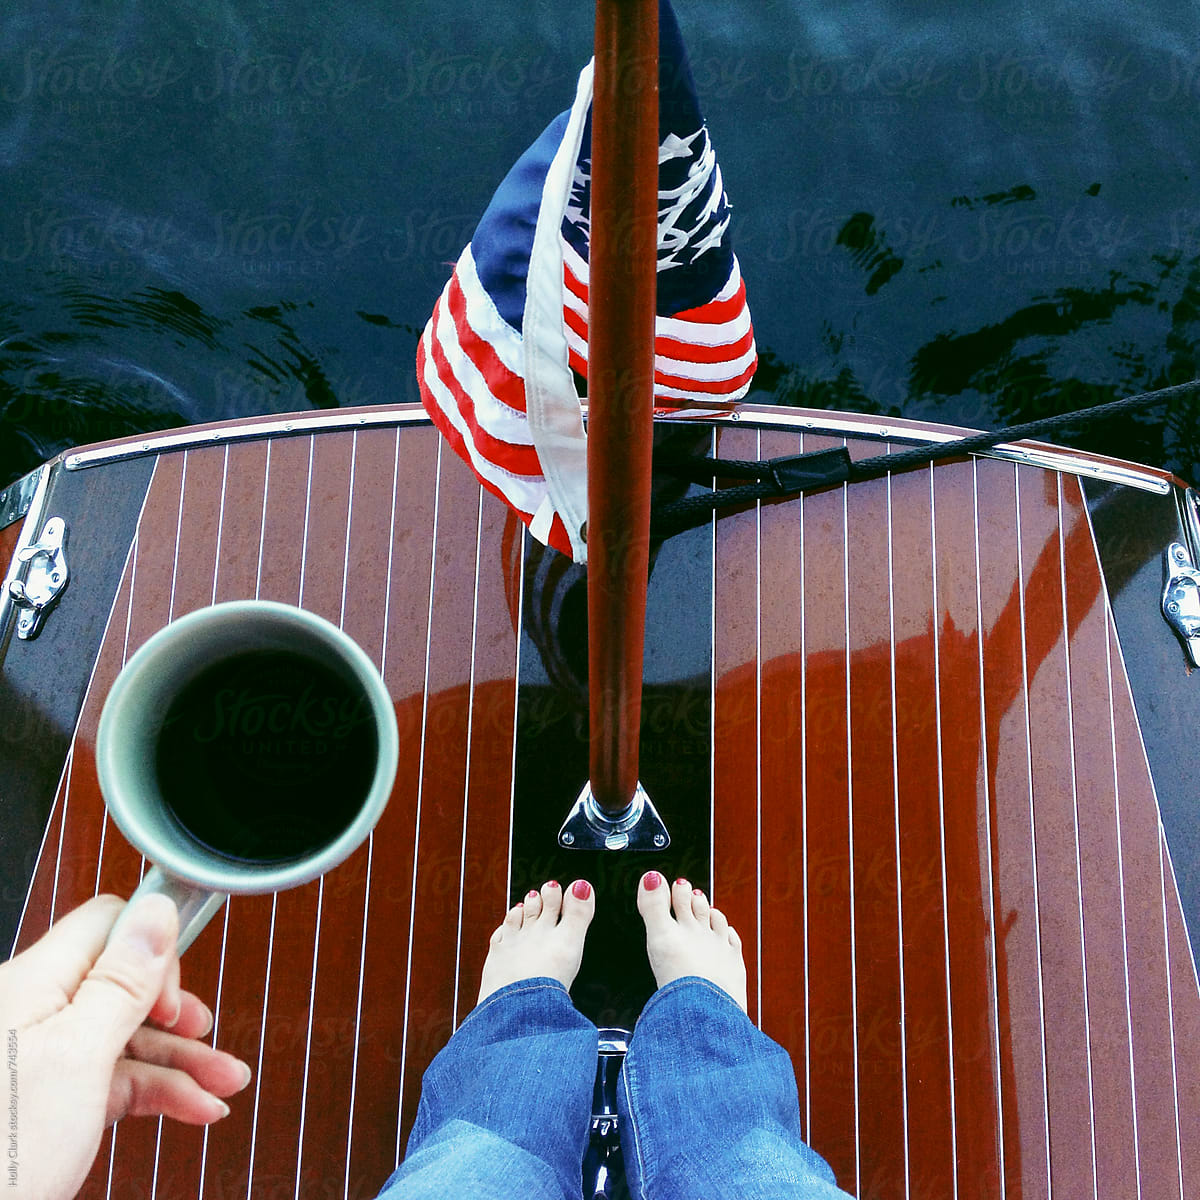 A Women Enjoys Coffee On The Back Of A Wooden Boat By Stocksy Contributor Holly Clark Stocksy